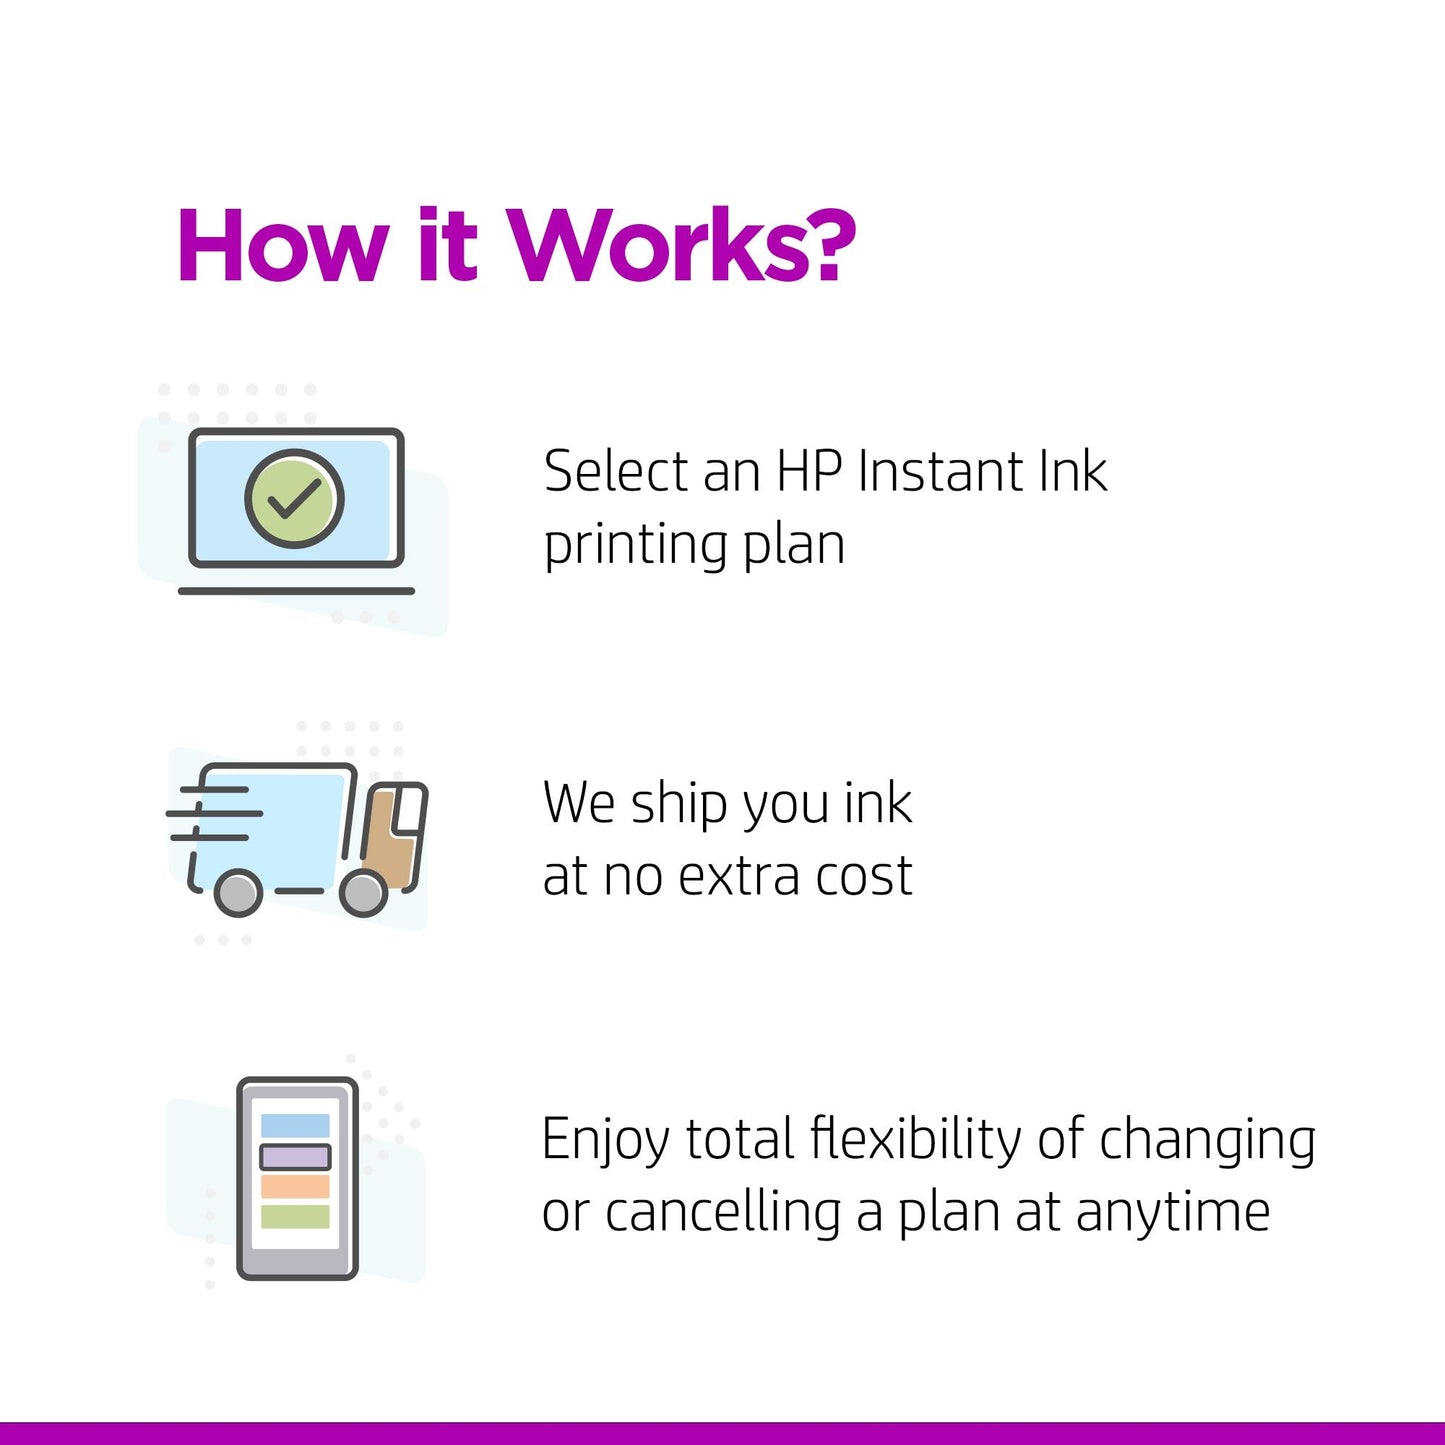 HP DeskJet 3760 All-in-One Printer, Color, Printer for Home, Print, copy, scan, wireless, Wireless; Instant Ink eligible; Print from phone or tablet; Scan to PDF